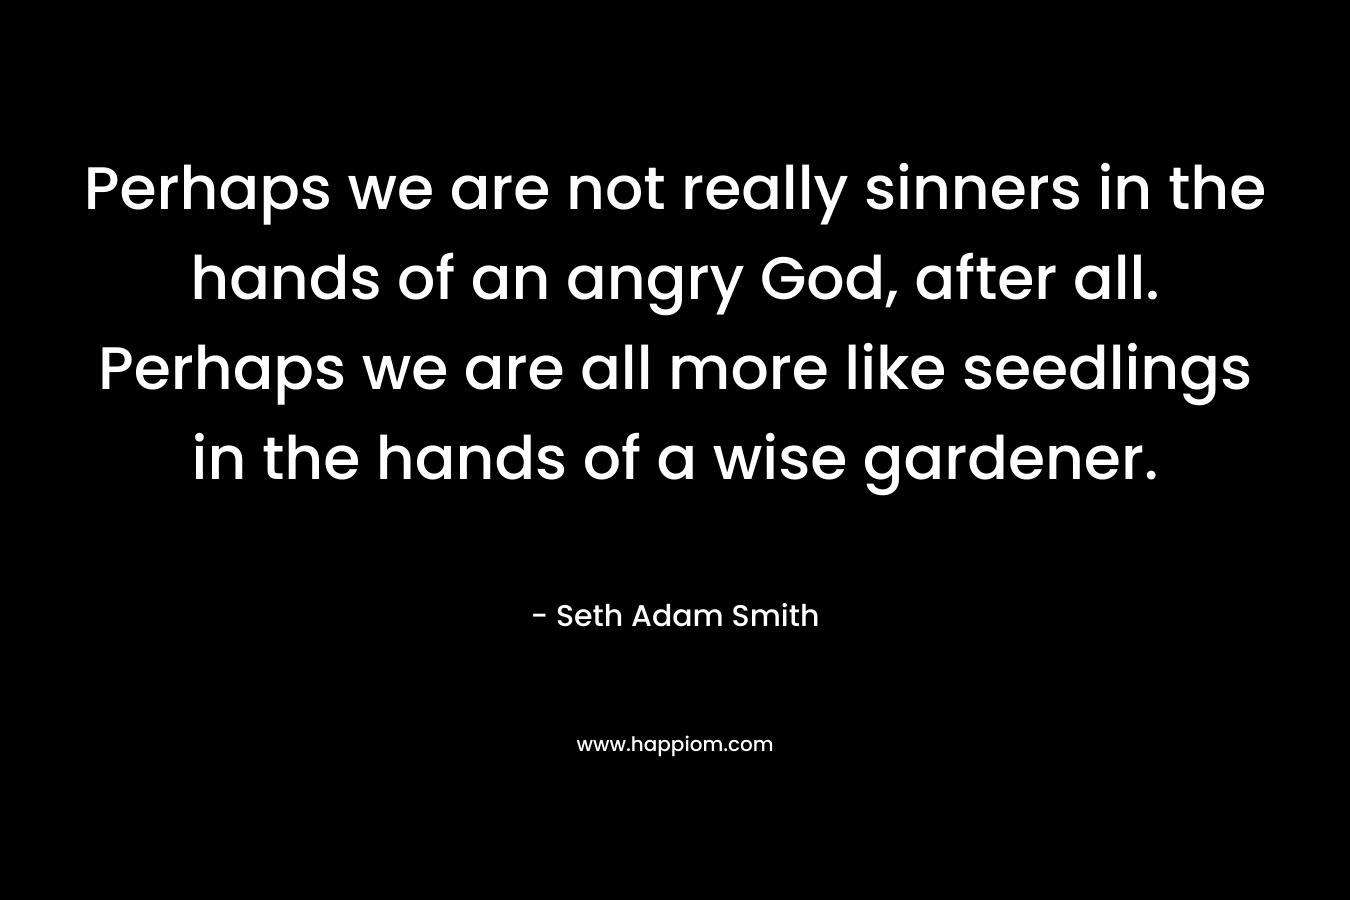 Perhaps we are not really sinners in the hands of an angry God, after all. Perhaps we are all more like seedlings in the hands of a wise gardener.